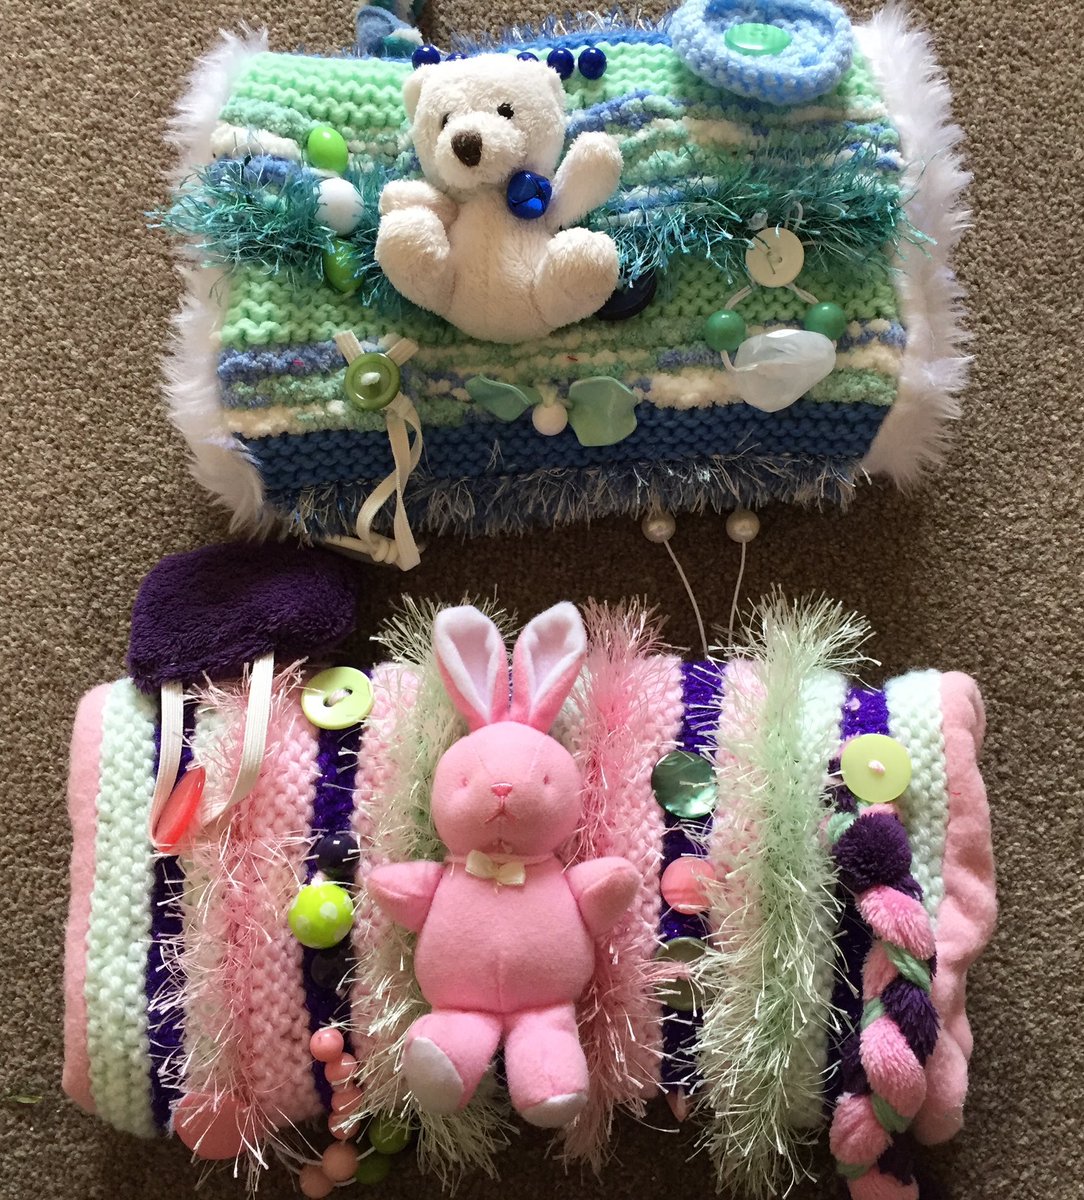 @McDonaldsUK So pleased you have soft toys not plastic. My friend makes Twiddle Mitts for Dementia patients and some of the little soft toys are wonderful for this although the Charity shops charge quite a lot for them